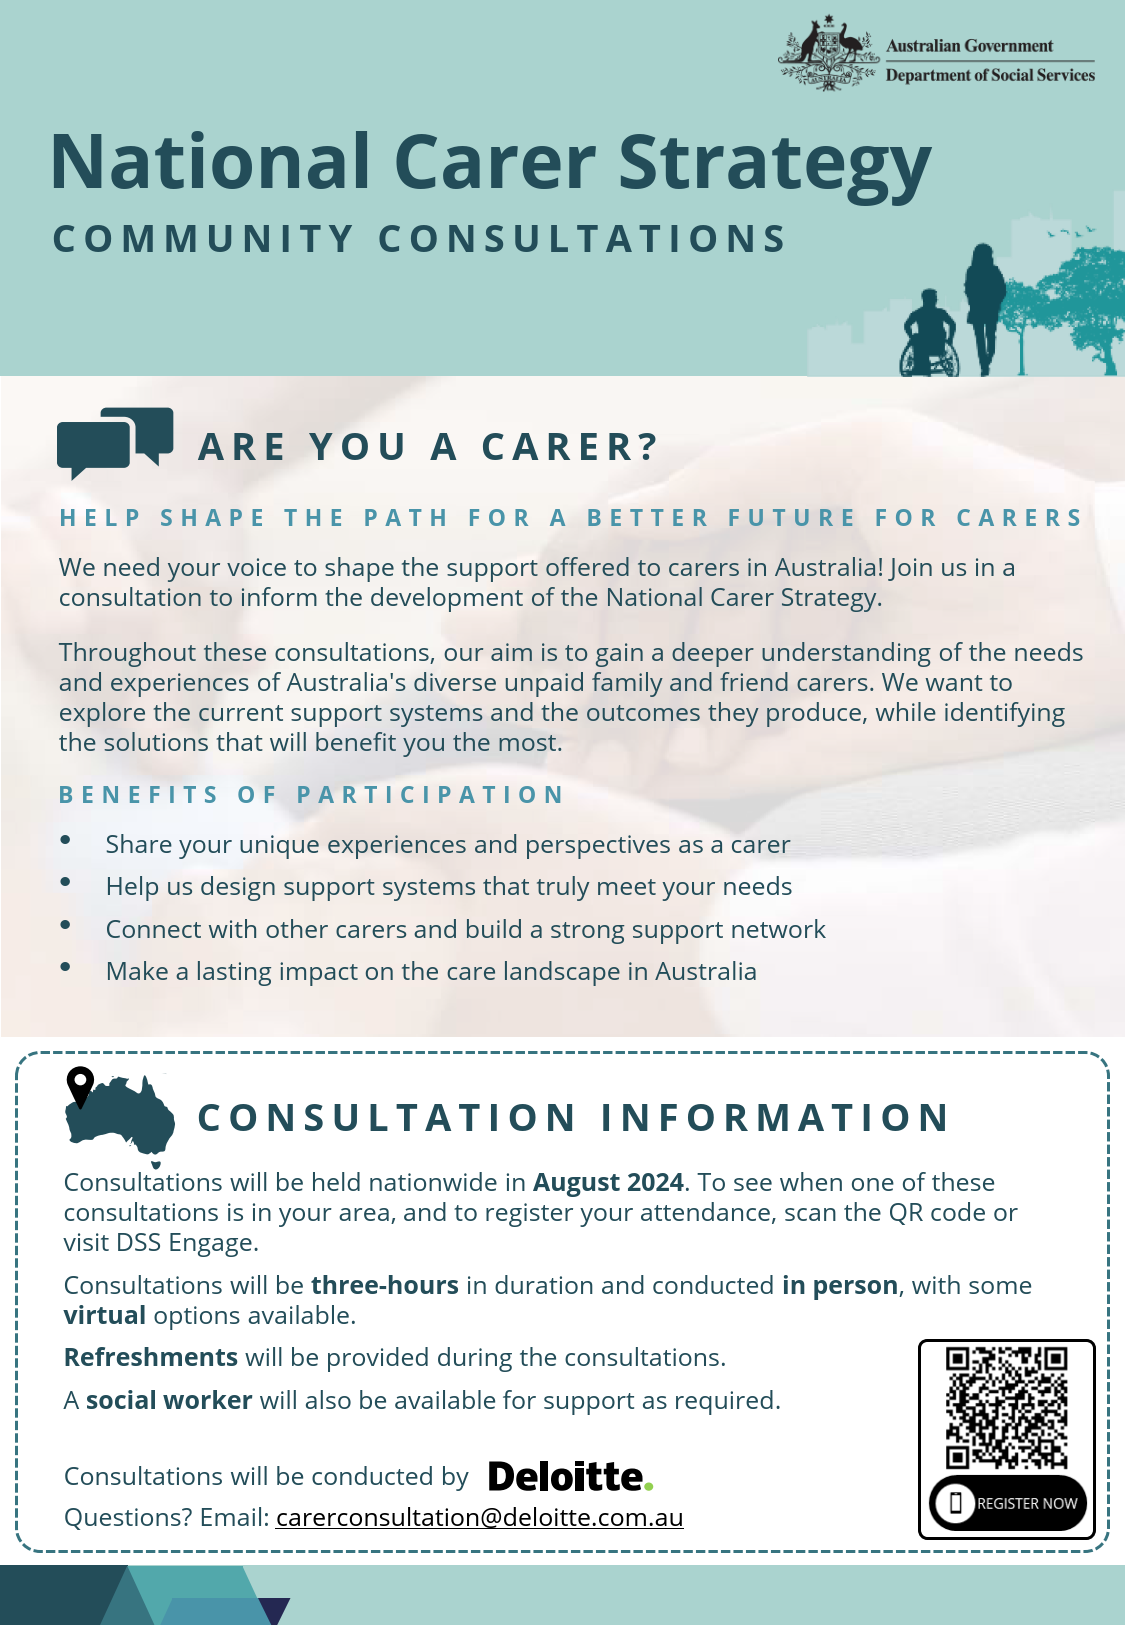 Carer Consultation for the Development of the National Carer Strategy